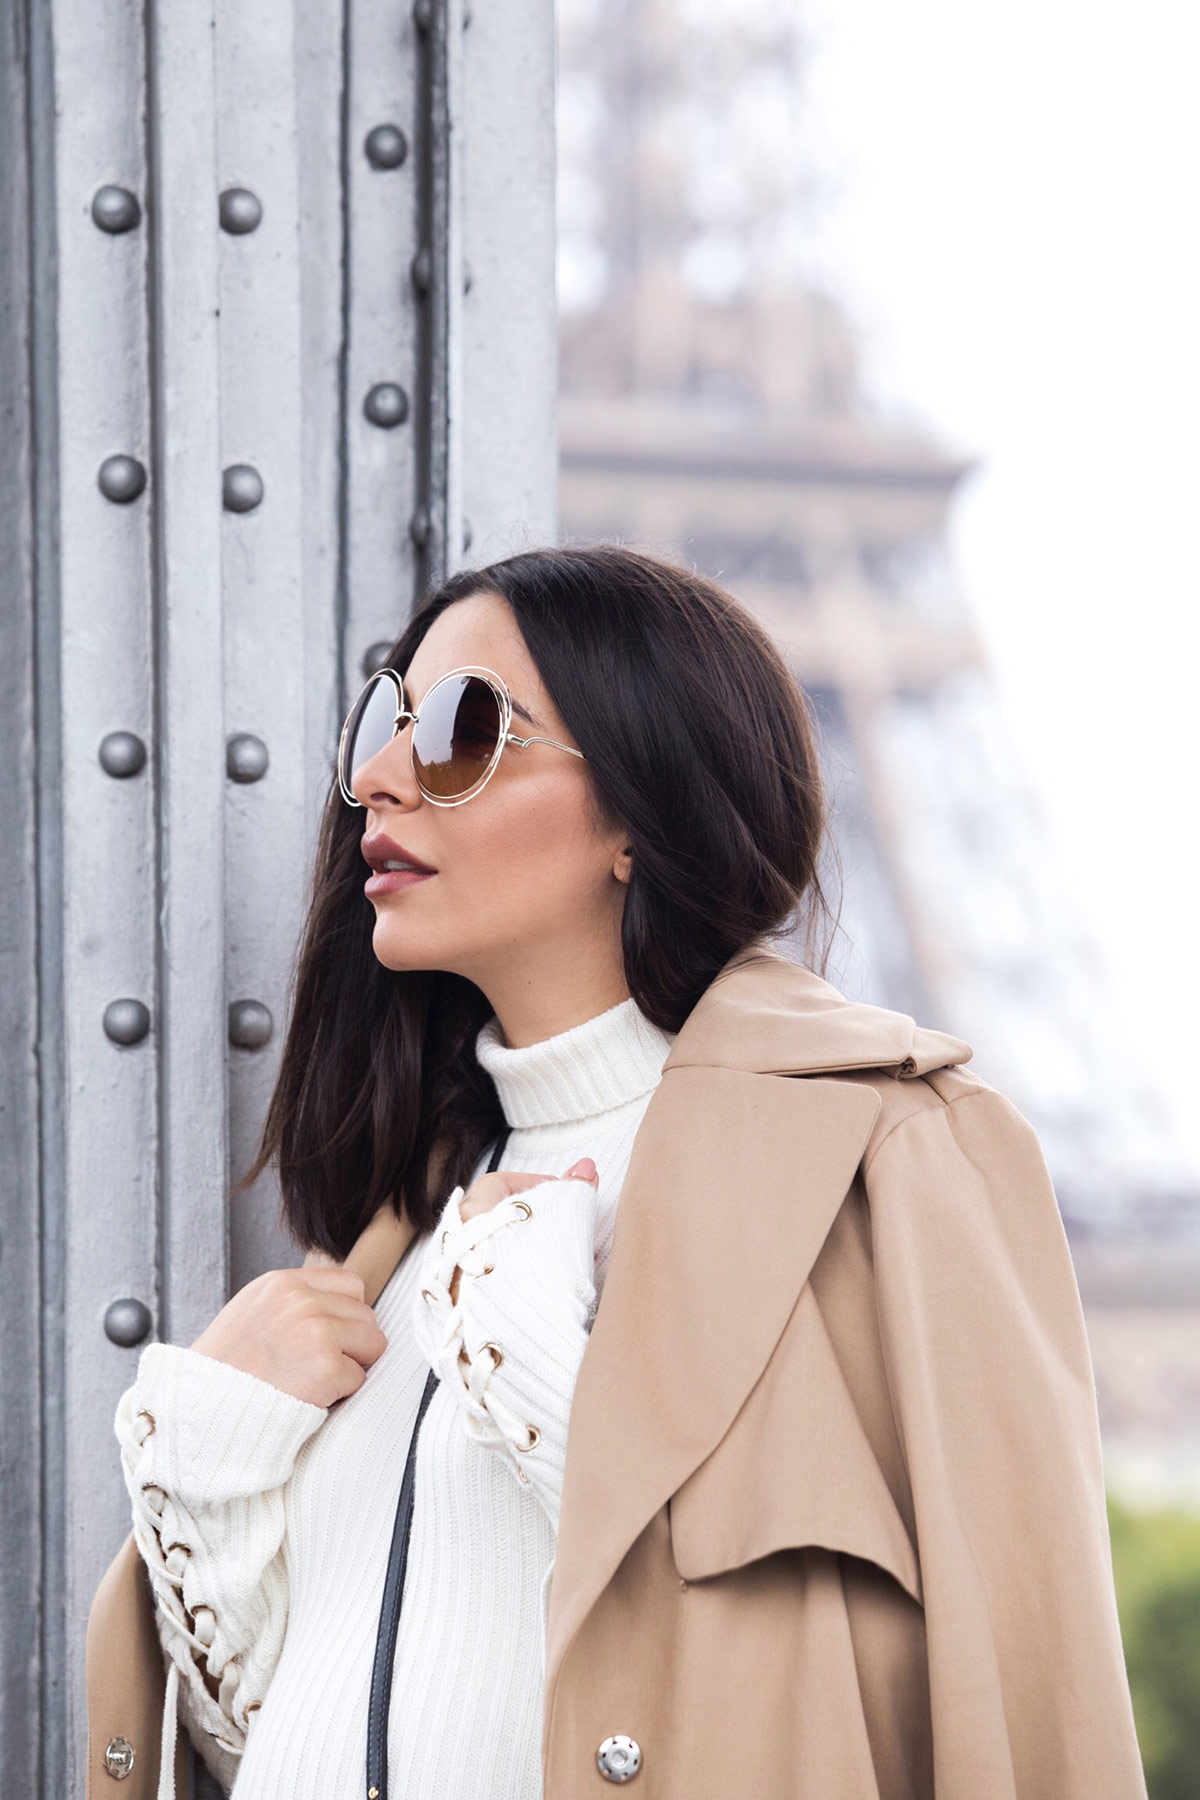 Maje ecru turtleneck dress for fall worn with camel trench coat, Chloé Carlina sunglasses and Louis Vuitton palm springs backpack by Stella Asteria - Fashion & Lifestyle Blogger in Paris - Paris Street Style & Pregnancy Style inspiration